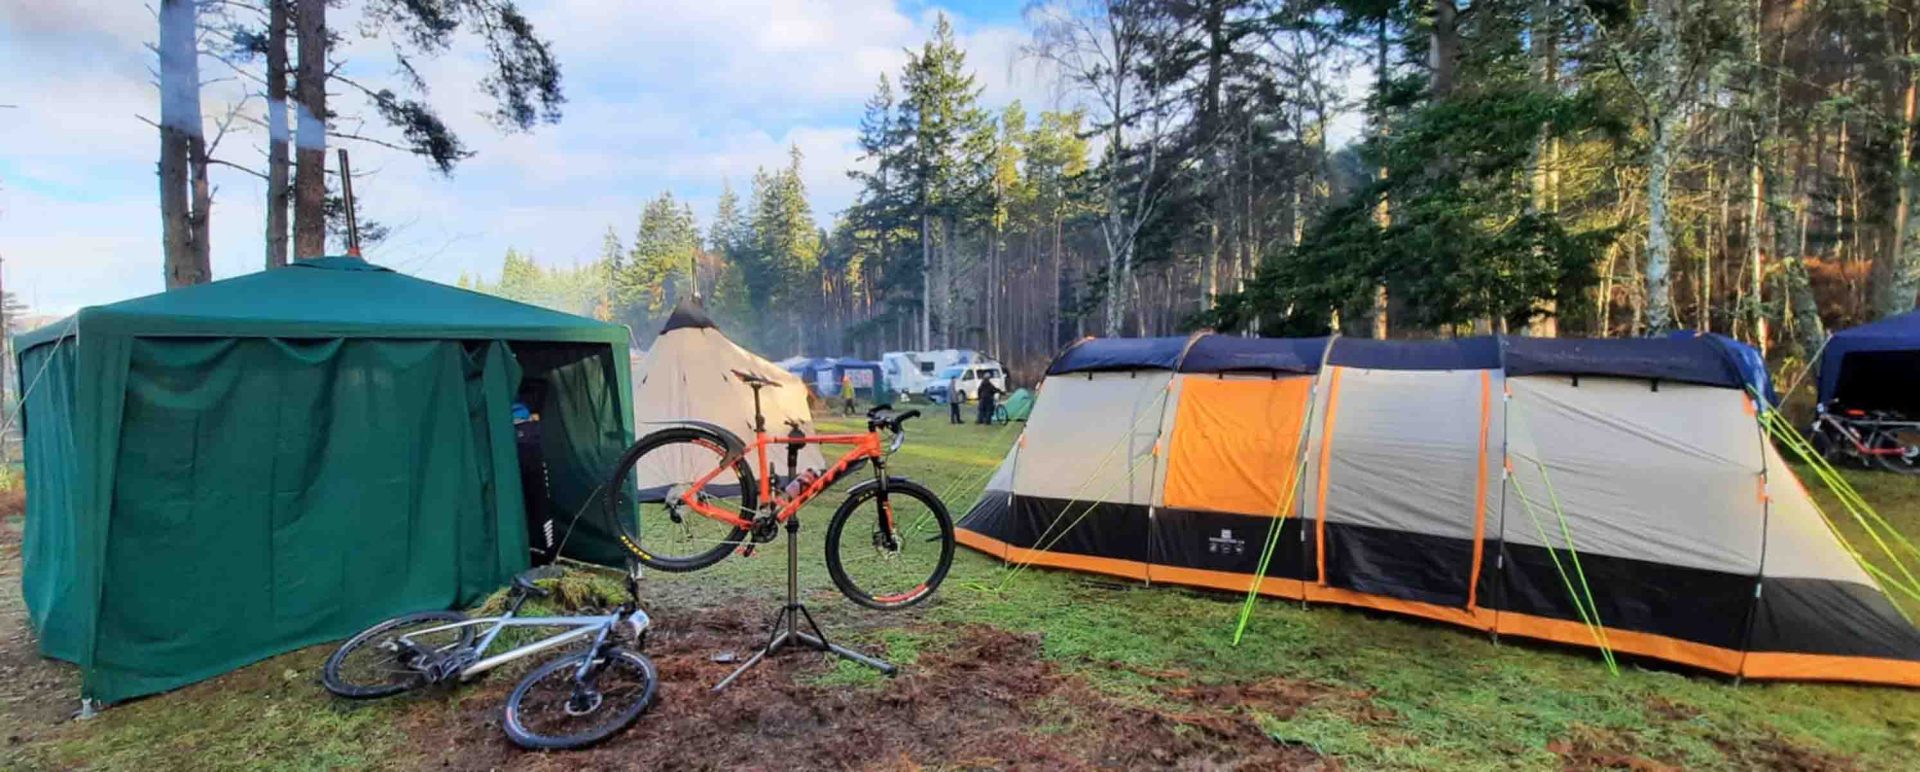 Team 518 campsite and workshop at the Strathpuffer